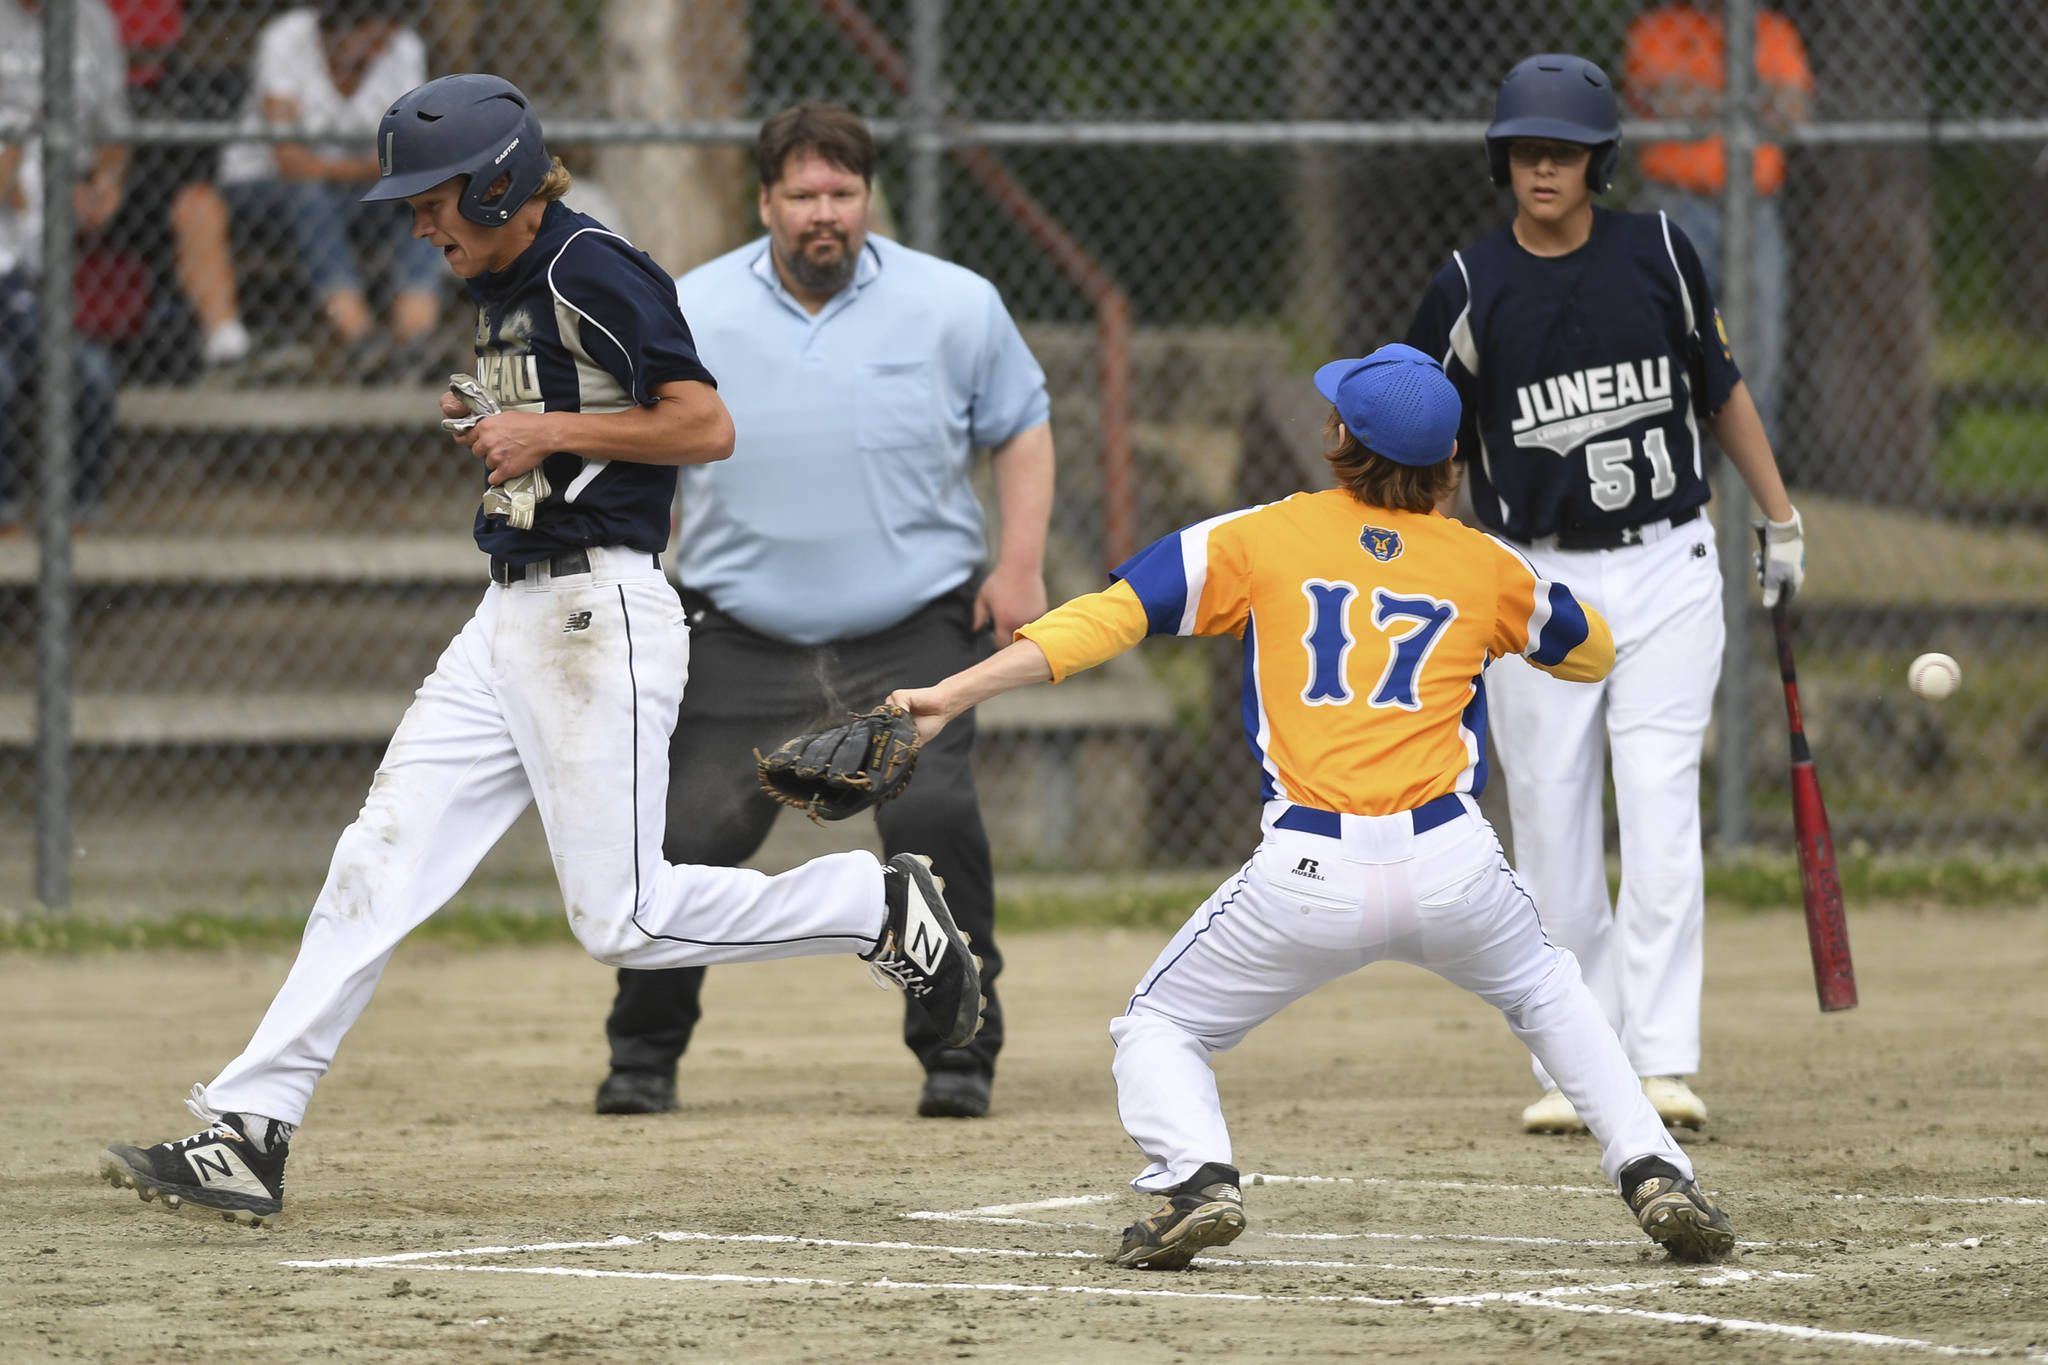 Juneau’s Gabe Storie steals home on a passed ball in the first inning against Bartlett’s pitcher Nelson Korshin in Legion League baseball at Adair-Kennedy Memorial Park on Friday, June 21, 2019. (Michael Penn | Juneau Empire)